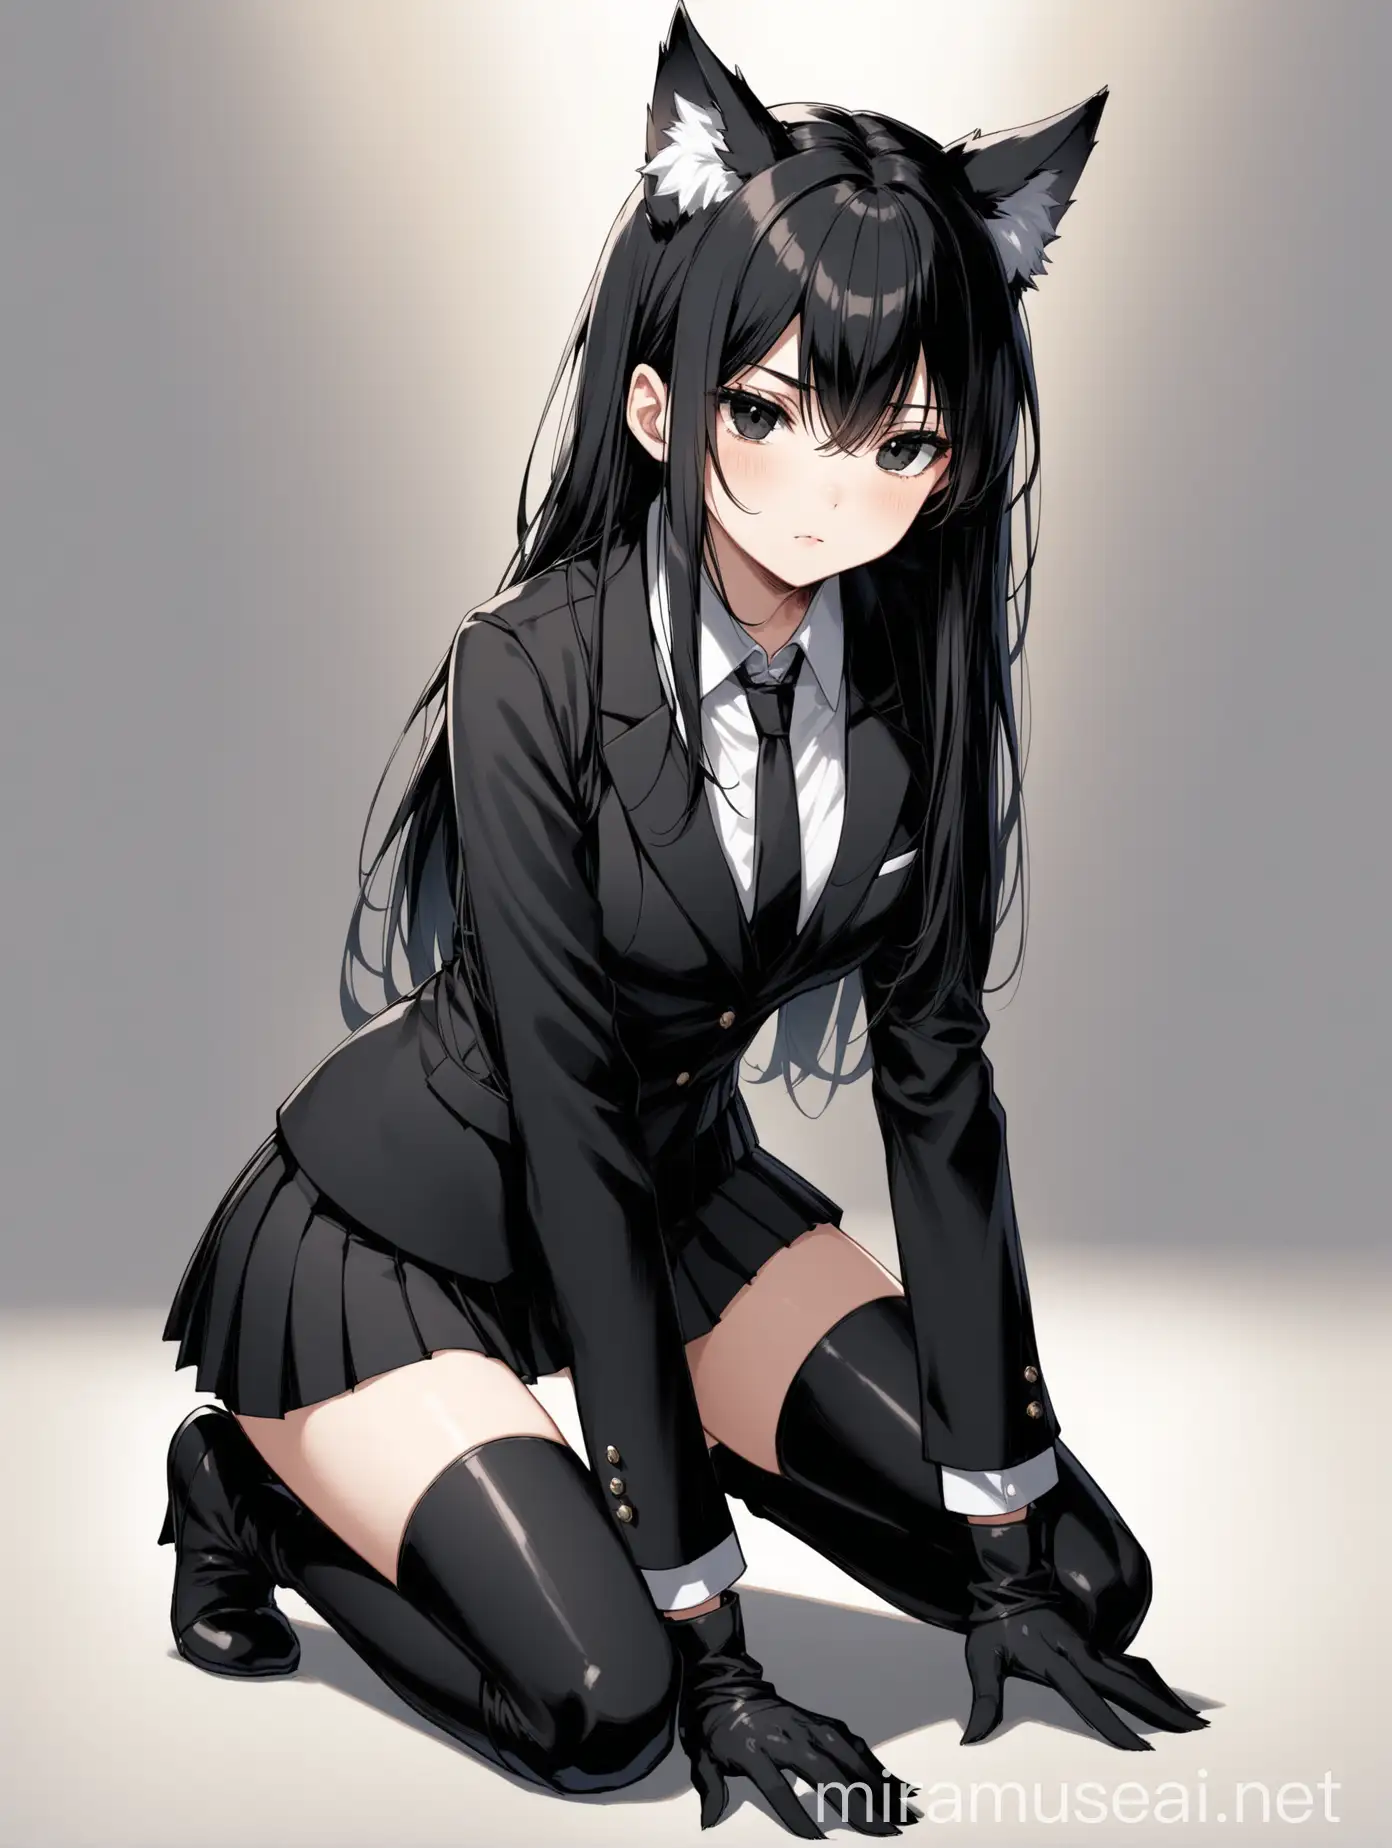 full body view, front view, tall girl, wolf girl, wolf ears, white ear tufts, black eyes, long hair, black hair, short black suit coat, short black pleated skirt, black gloves, long sleeves, black tall thigh boots, neutral expression, kneeling down on floor, legs together, head tilted up